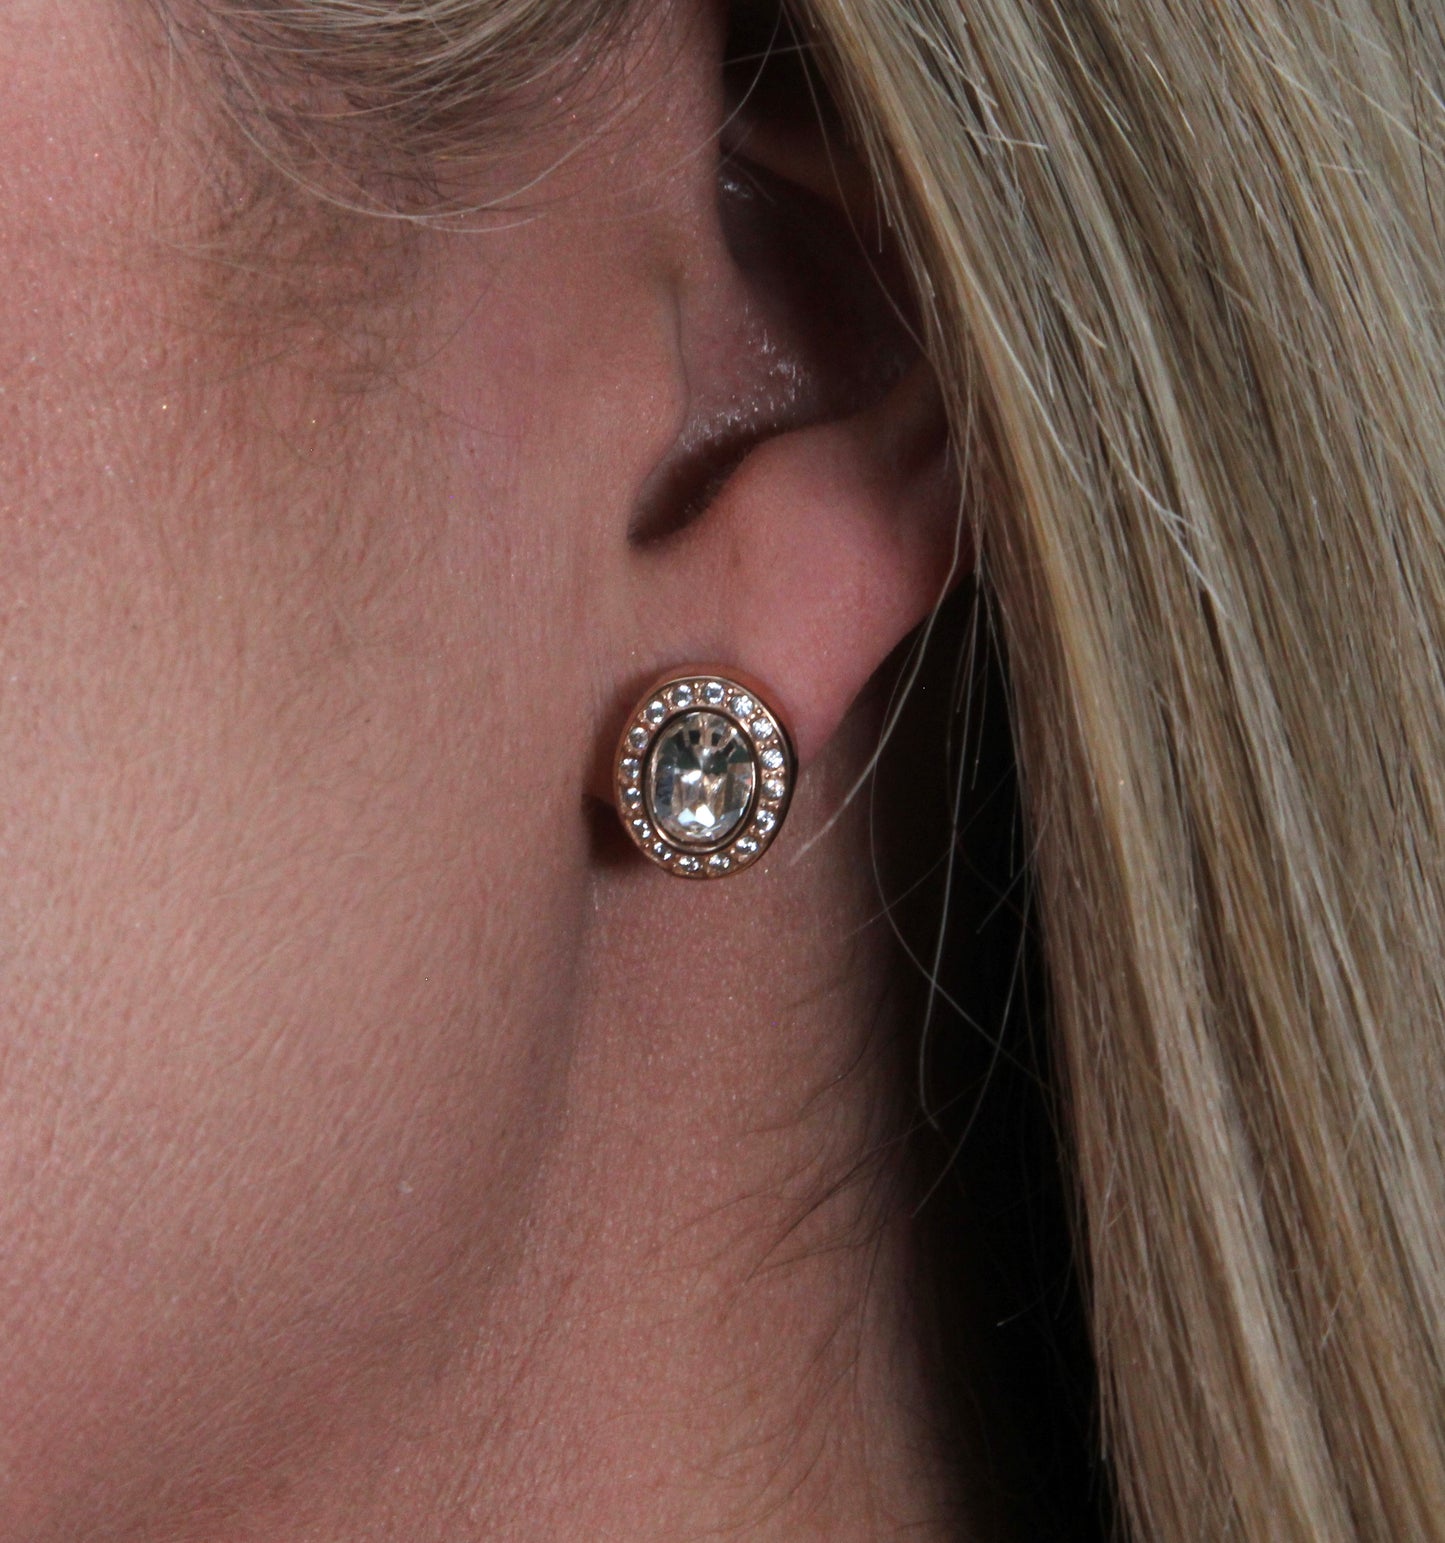 Extravaganza rose gold stud earrings